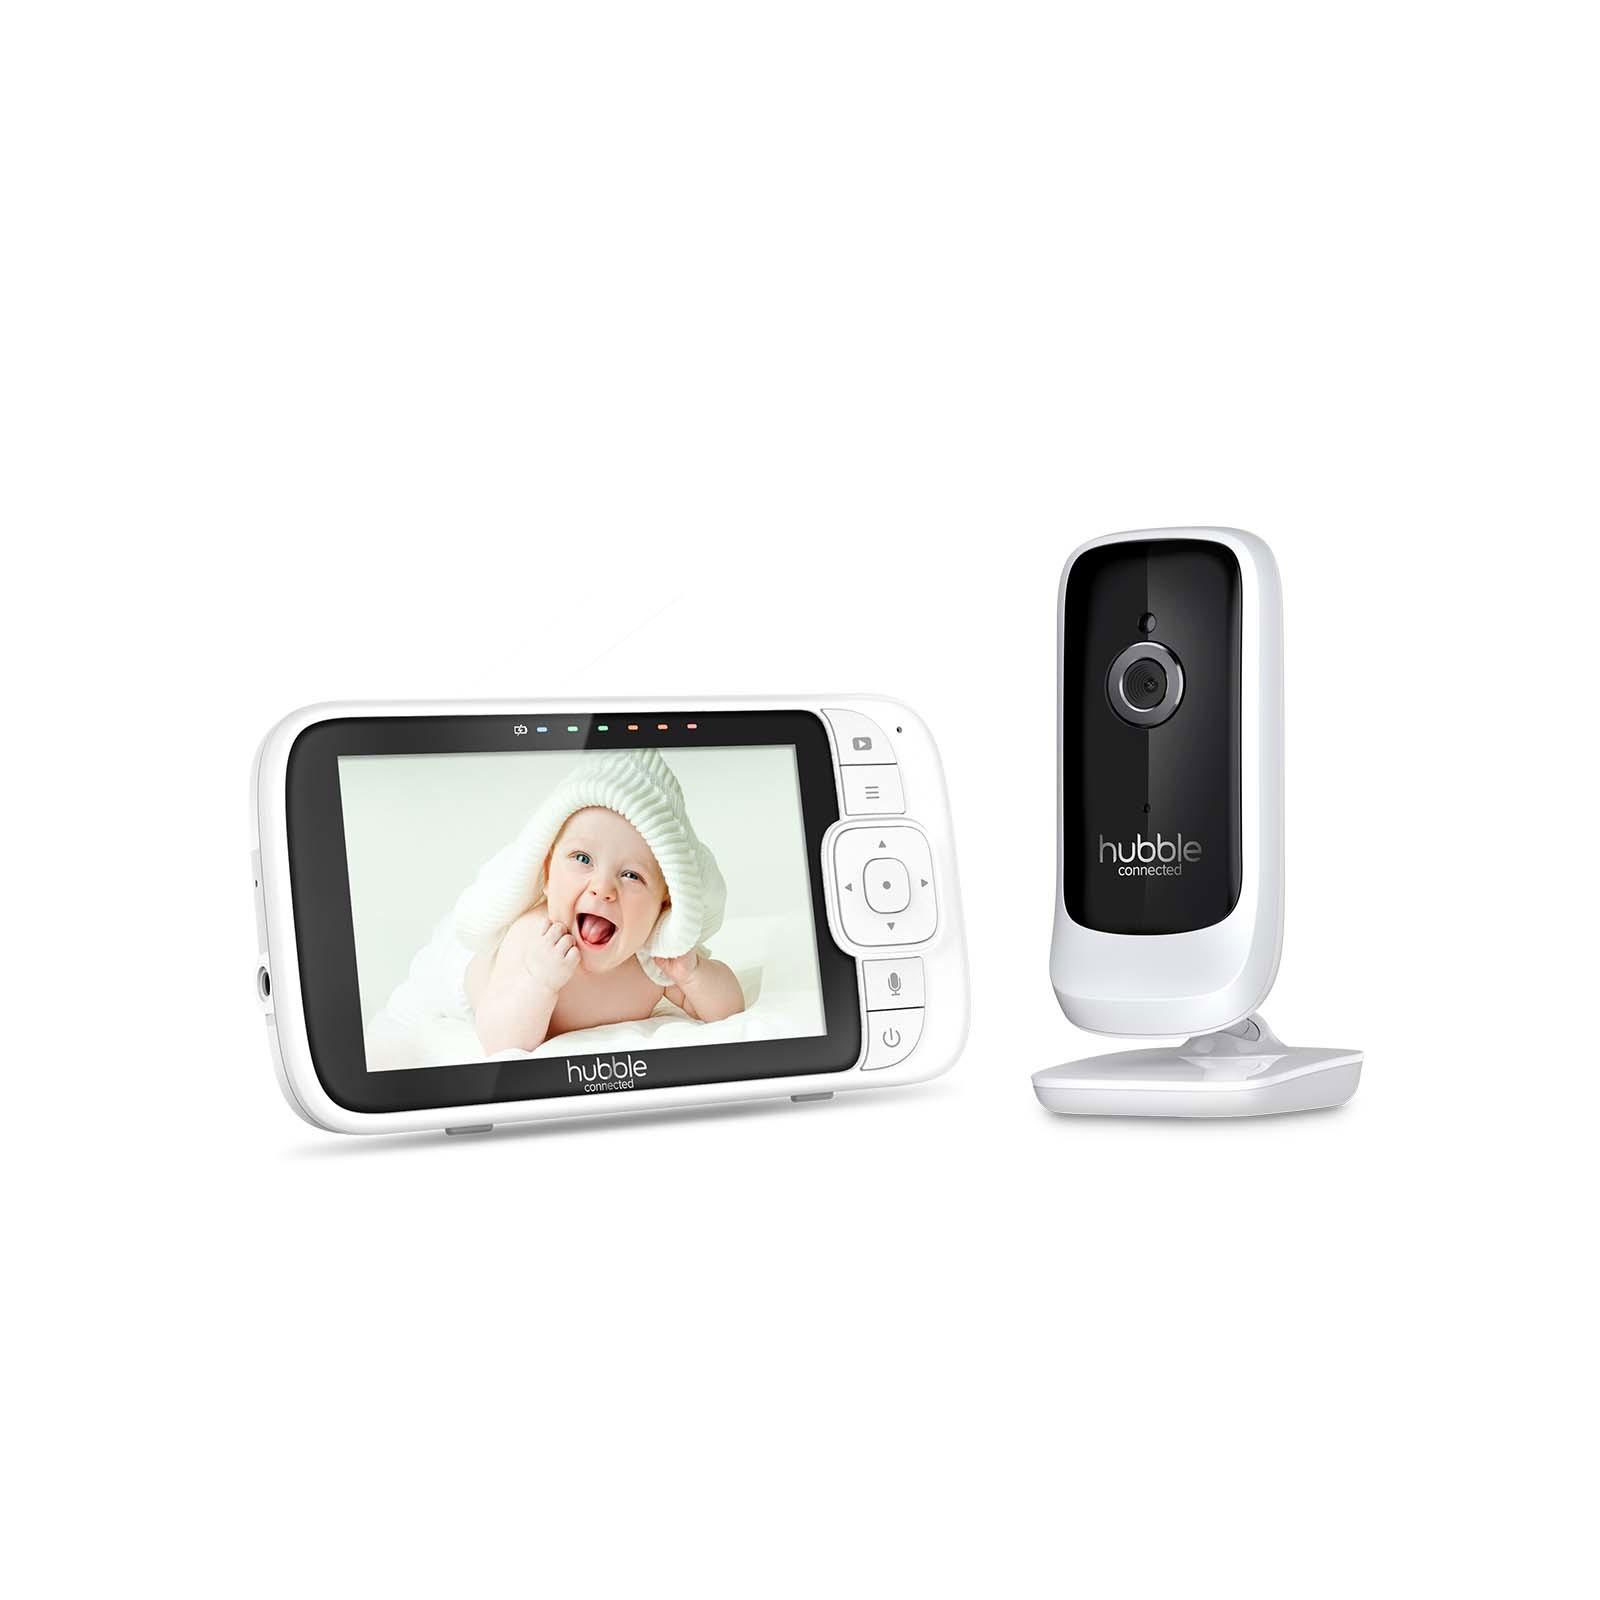 hubble connected Baby-Videophone Nursery View Premium 5"